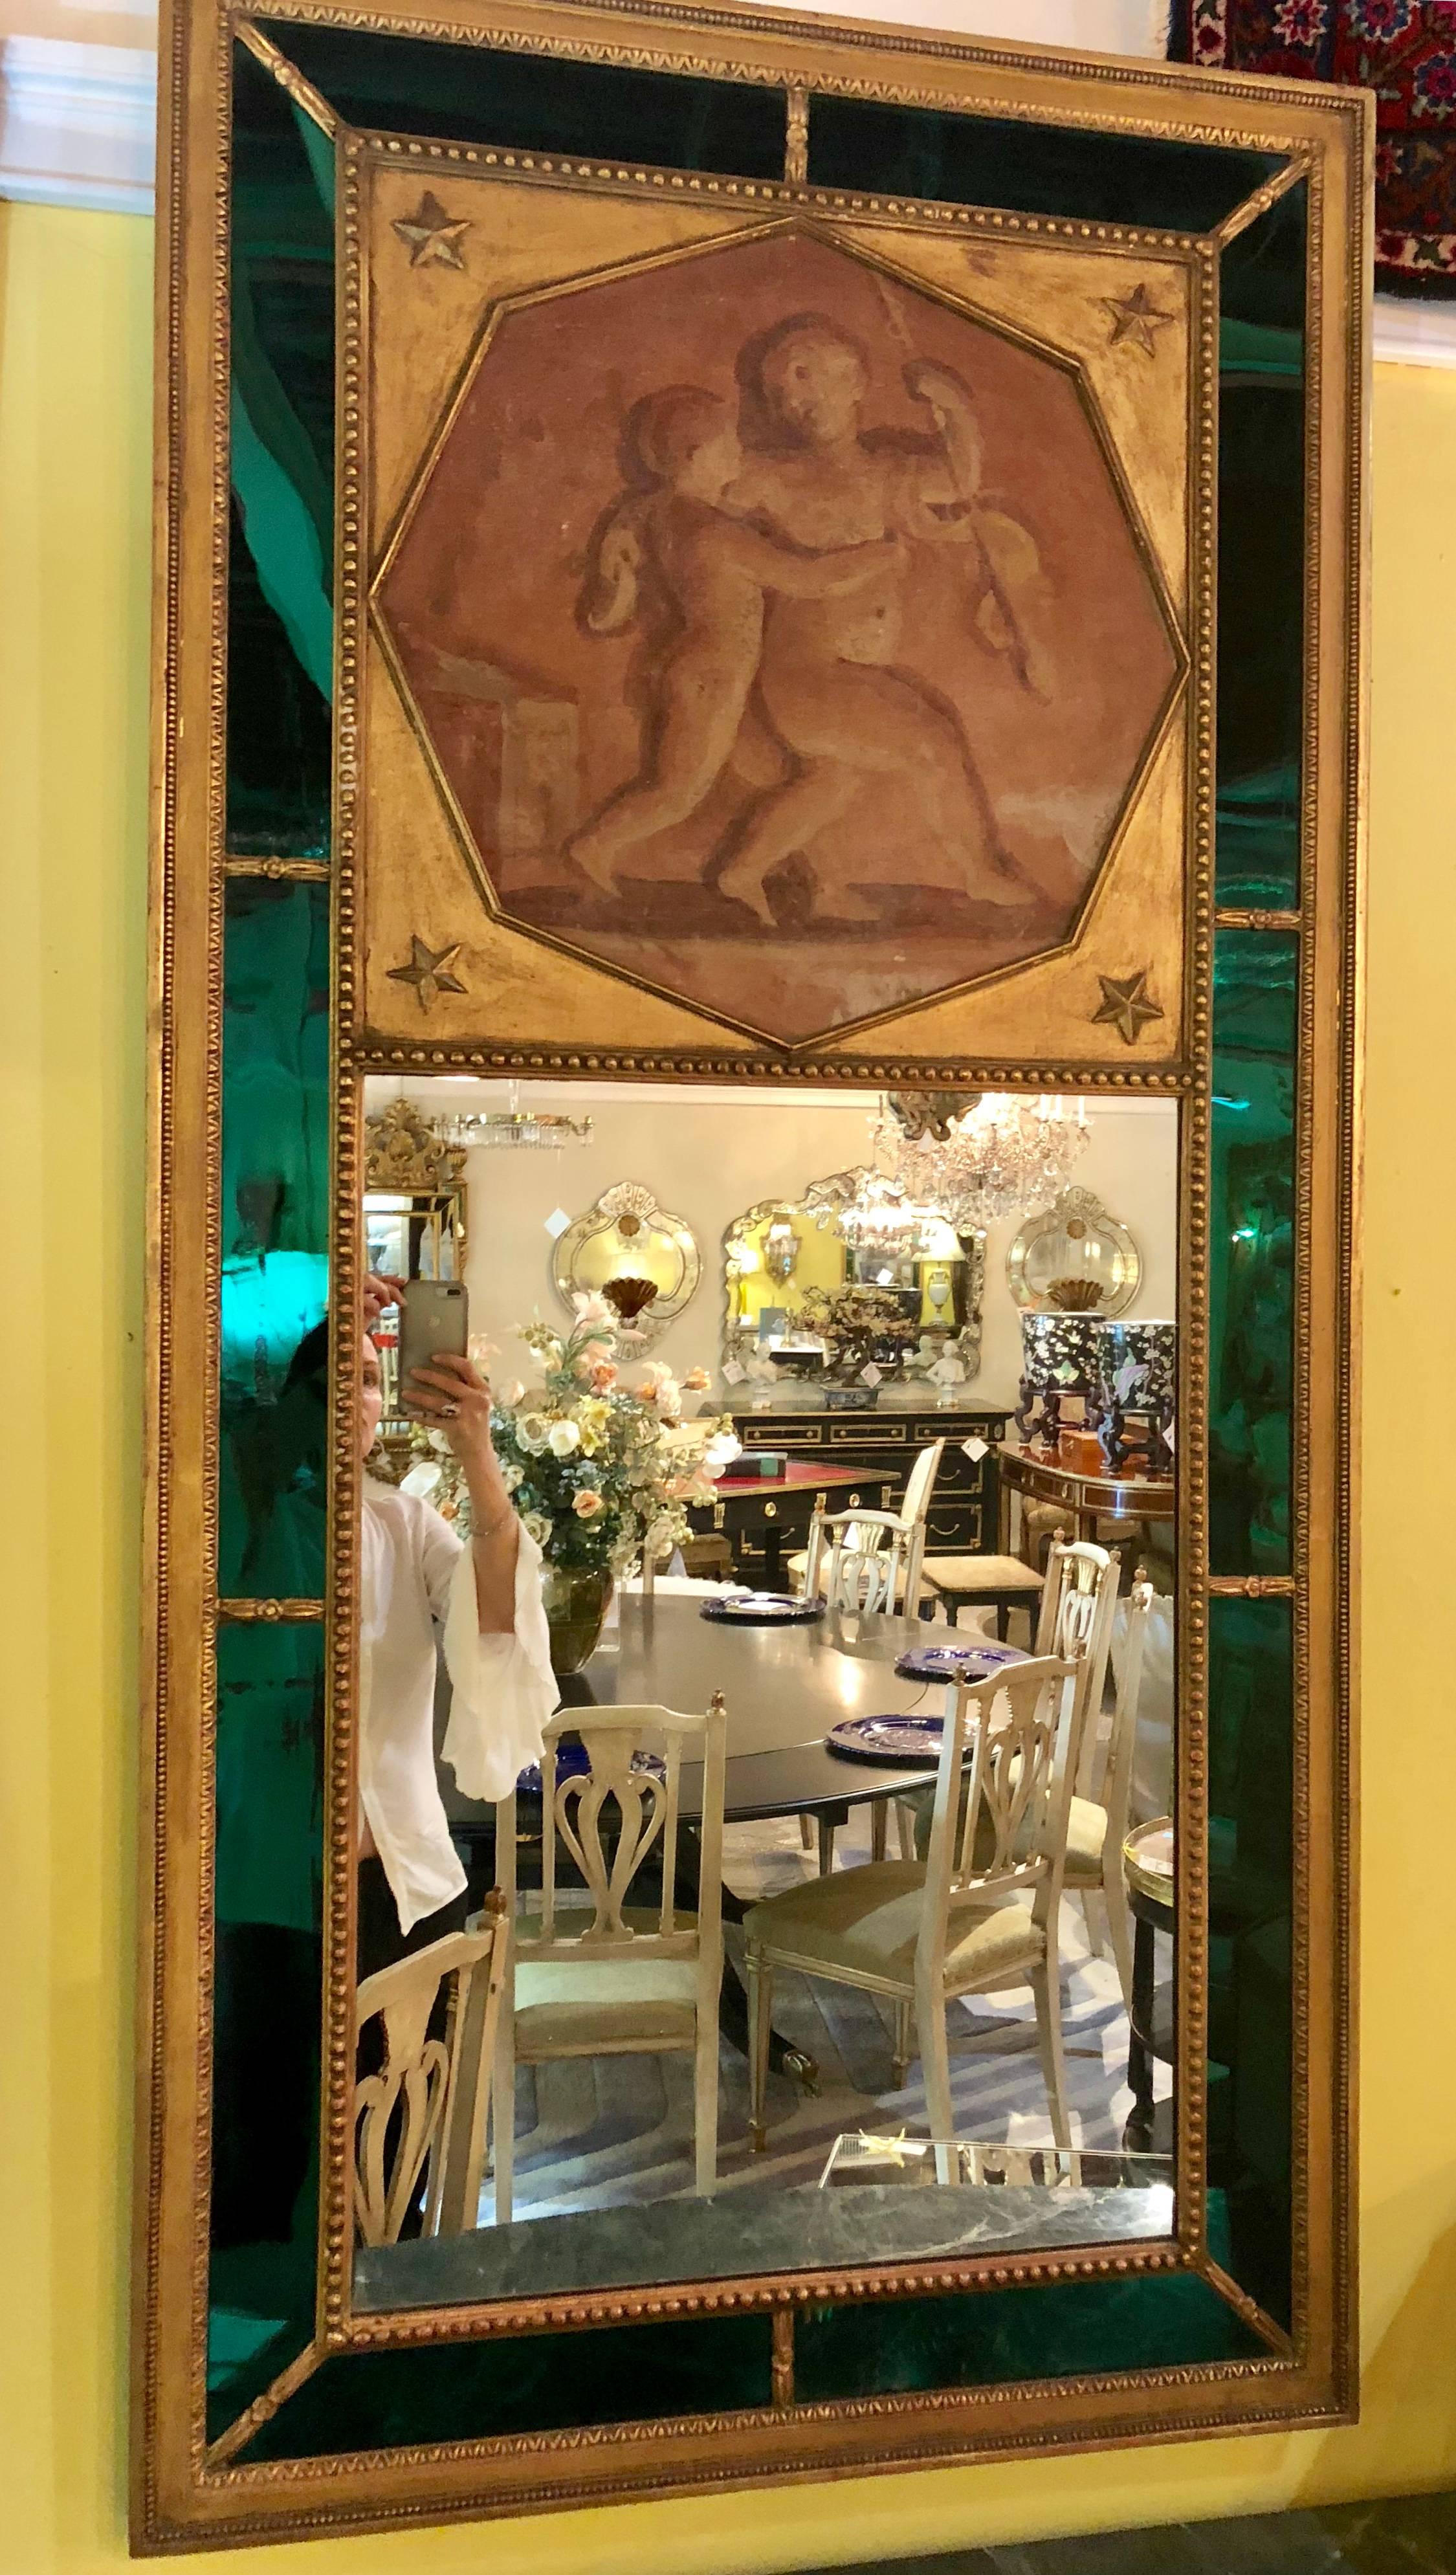 Pair of finest French Directoire style trumeau mirrors, the rectangular frame banded with green colored-glass, each decorated with painted cherubs, Jansen.